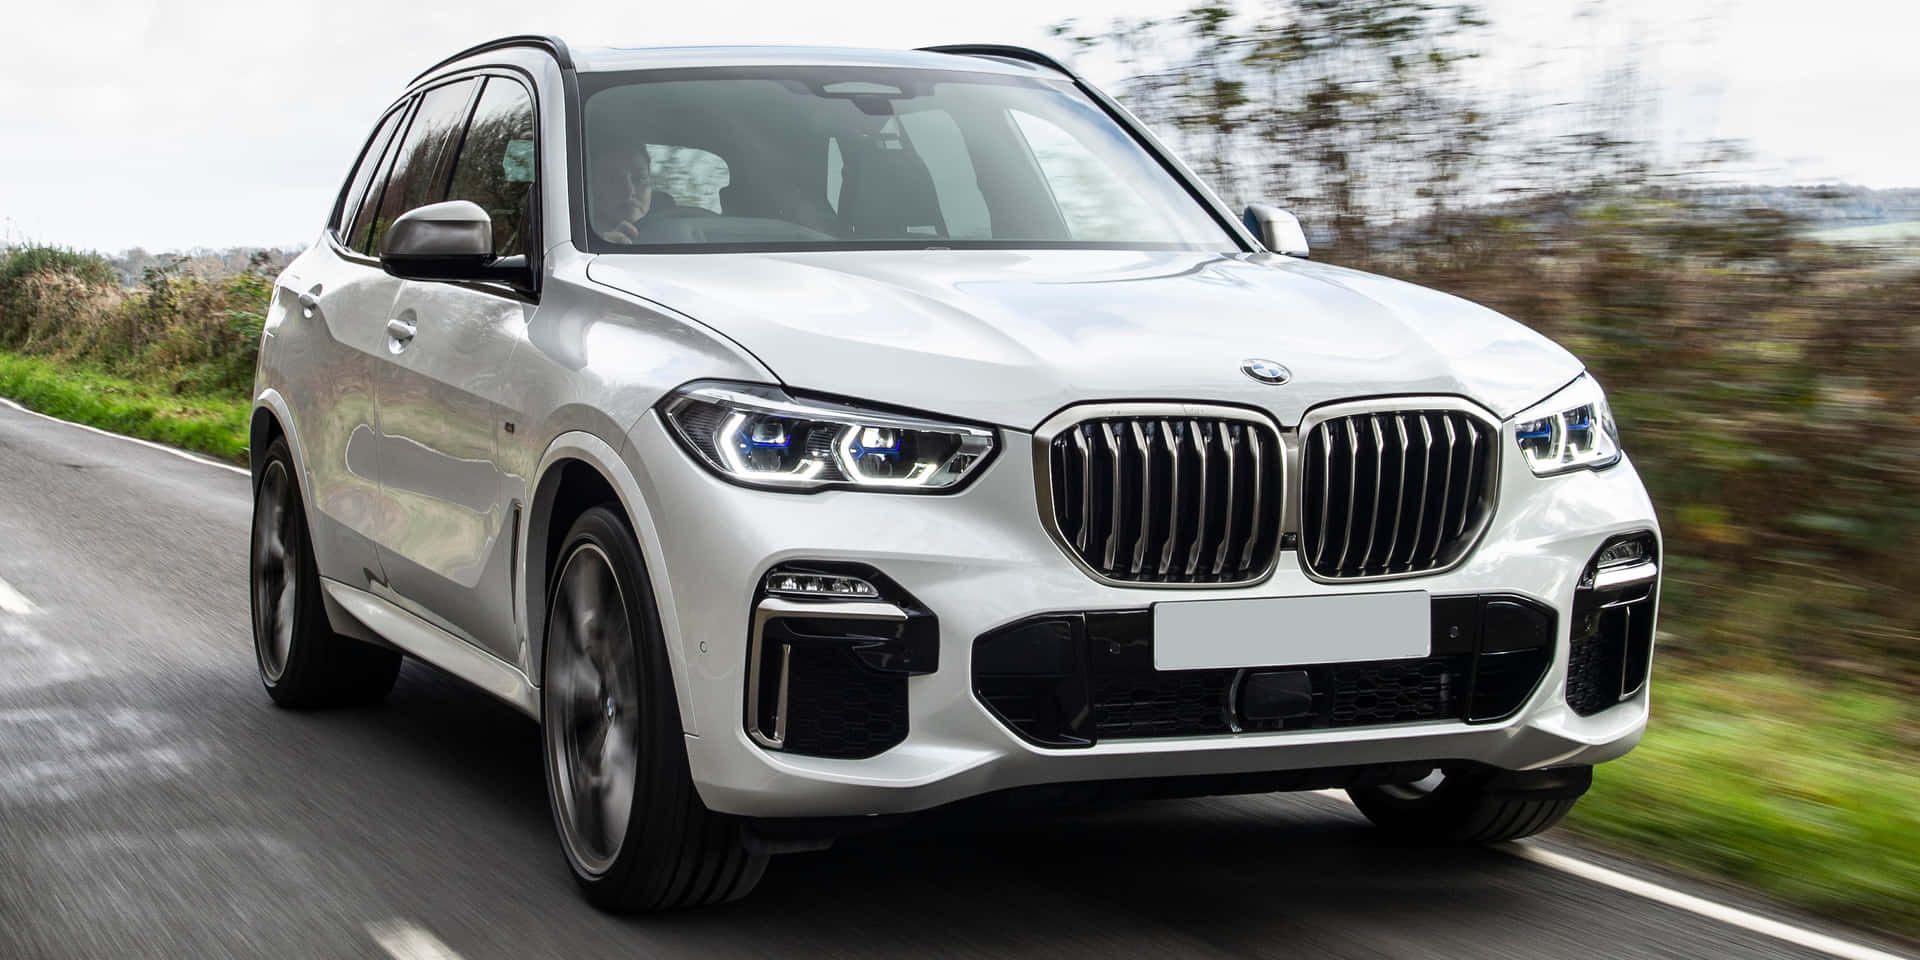 Stunning BMW X5 On the Road Wallpaper